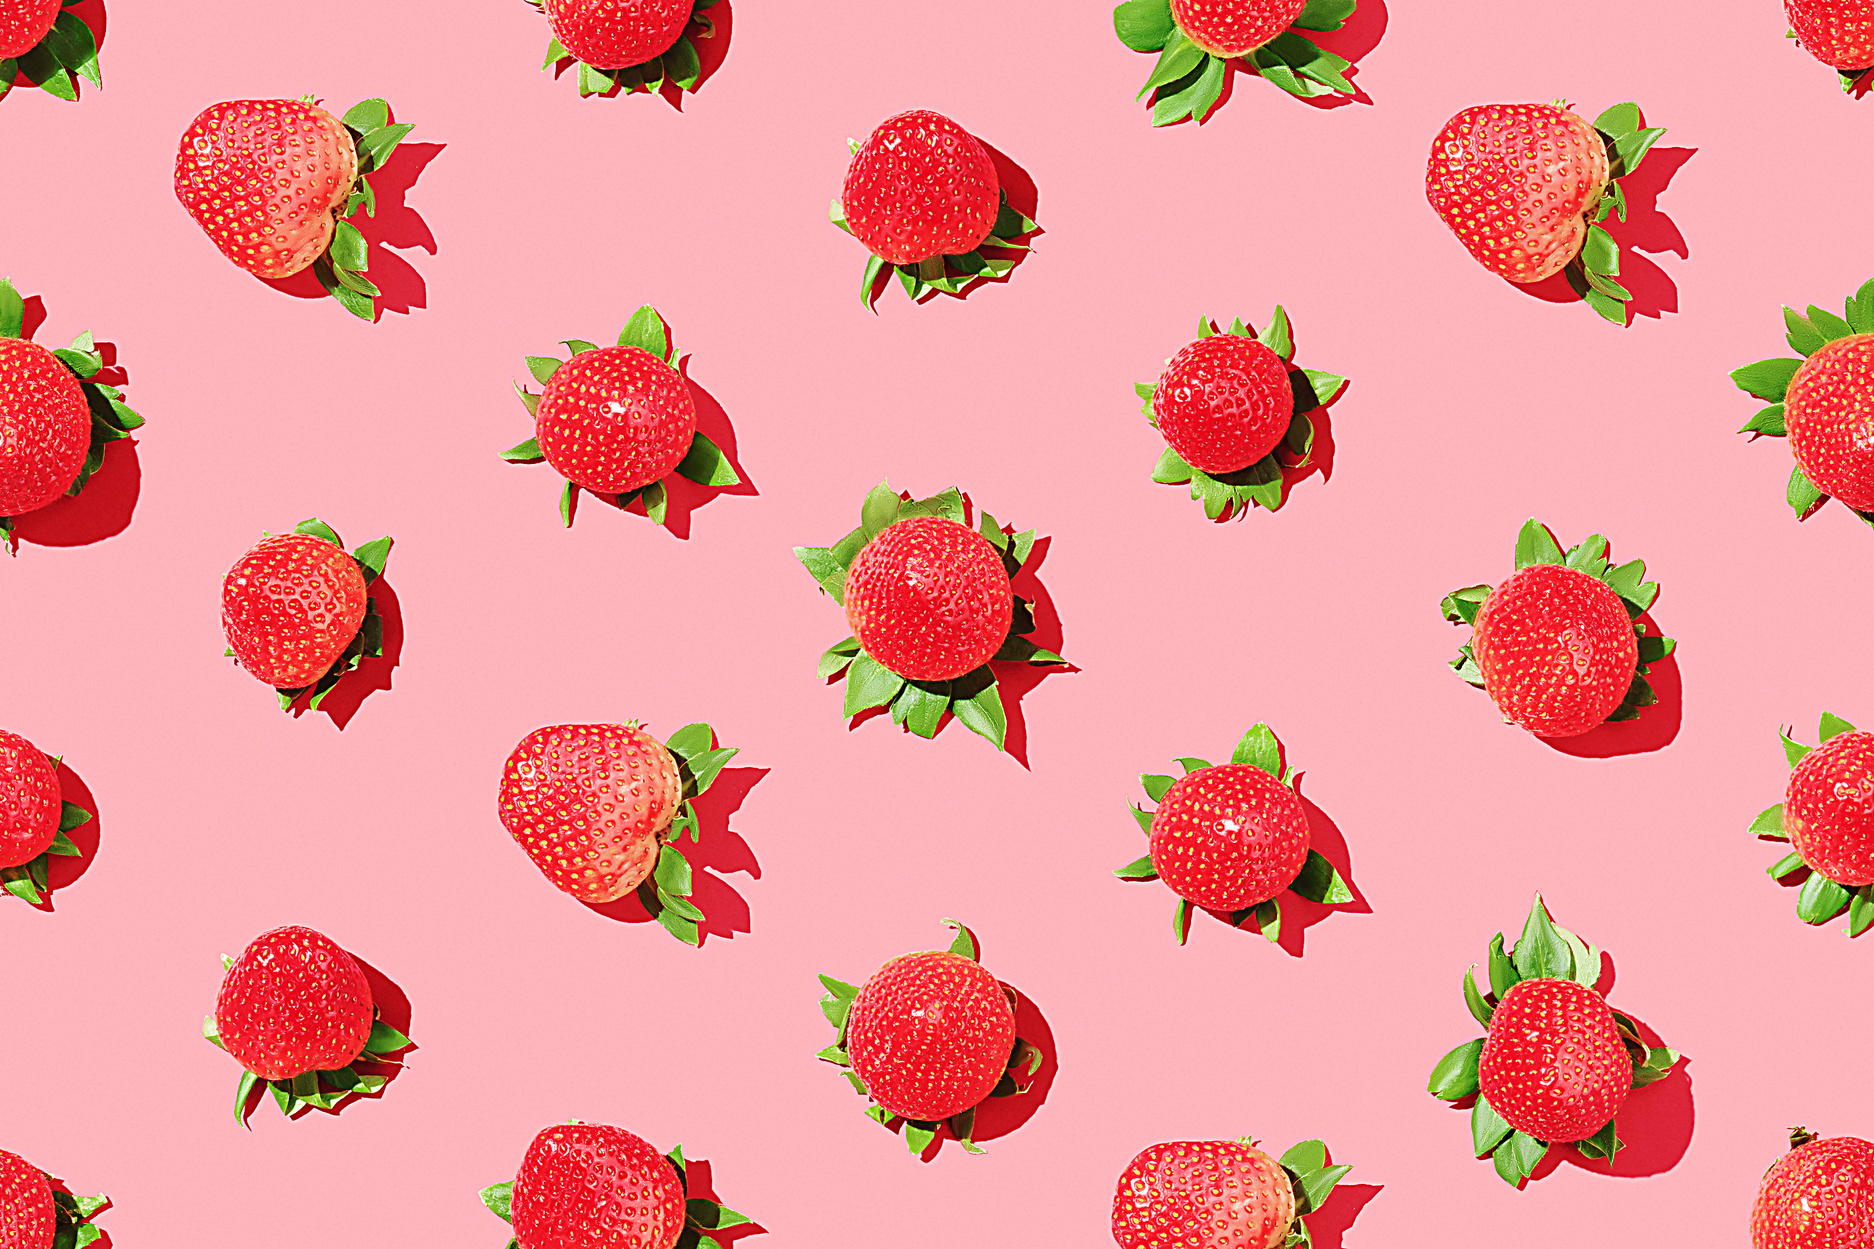 Strawberry pattern on a pink background. Juicy strawberries. Top view.